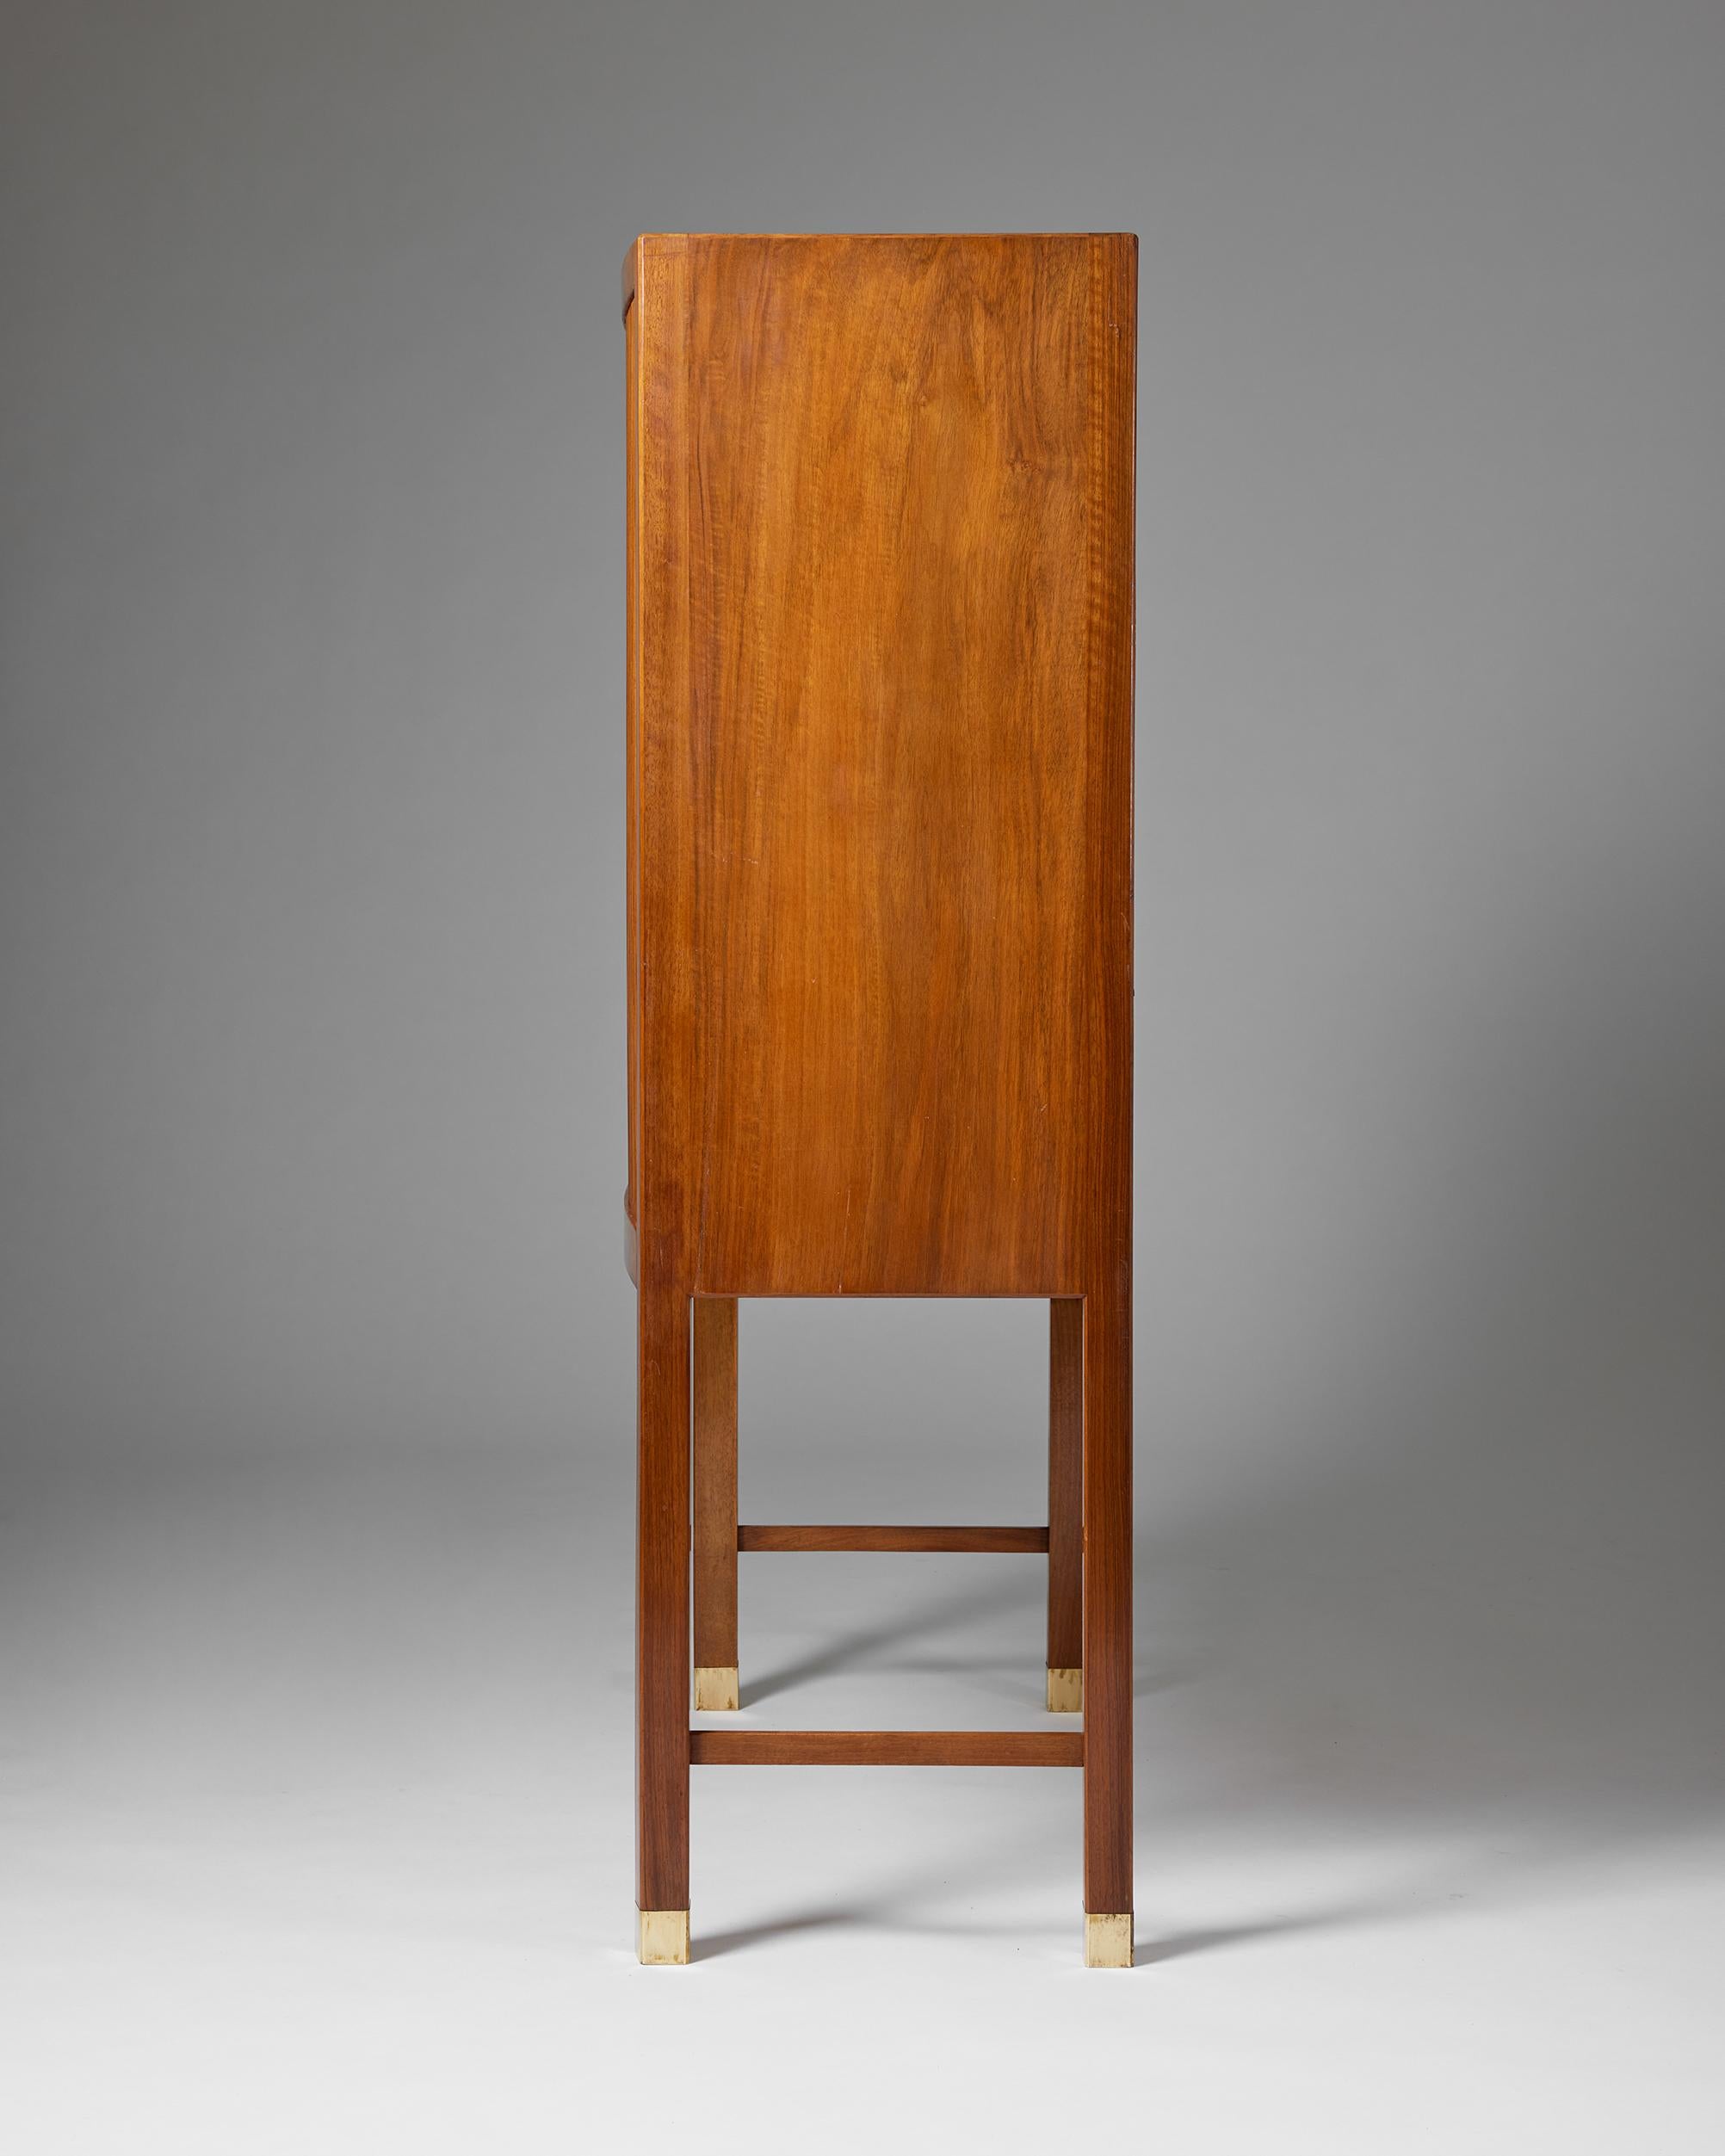 Mid-20th Century Cabinet with Tambour Doors Designed by a Danish Cabinetmaker, Denmark, 1950s For Sale